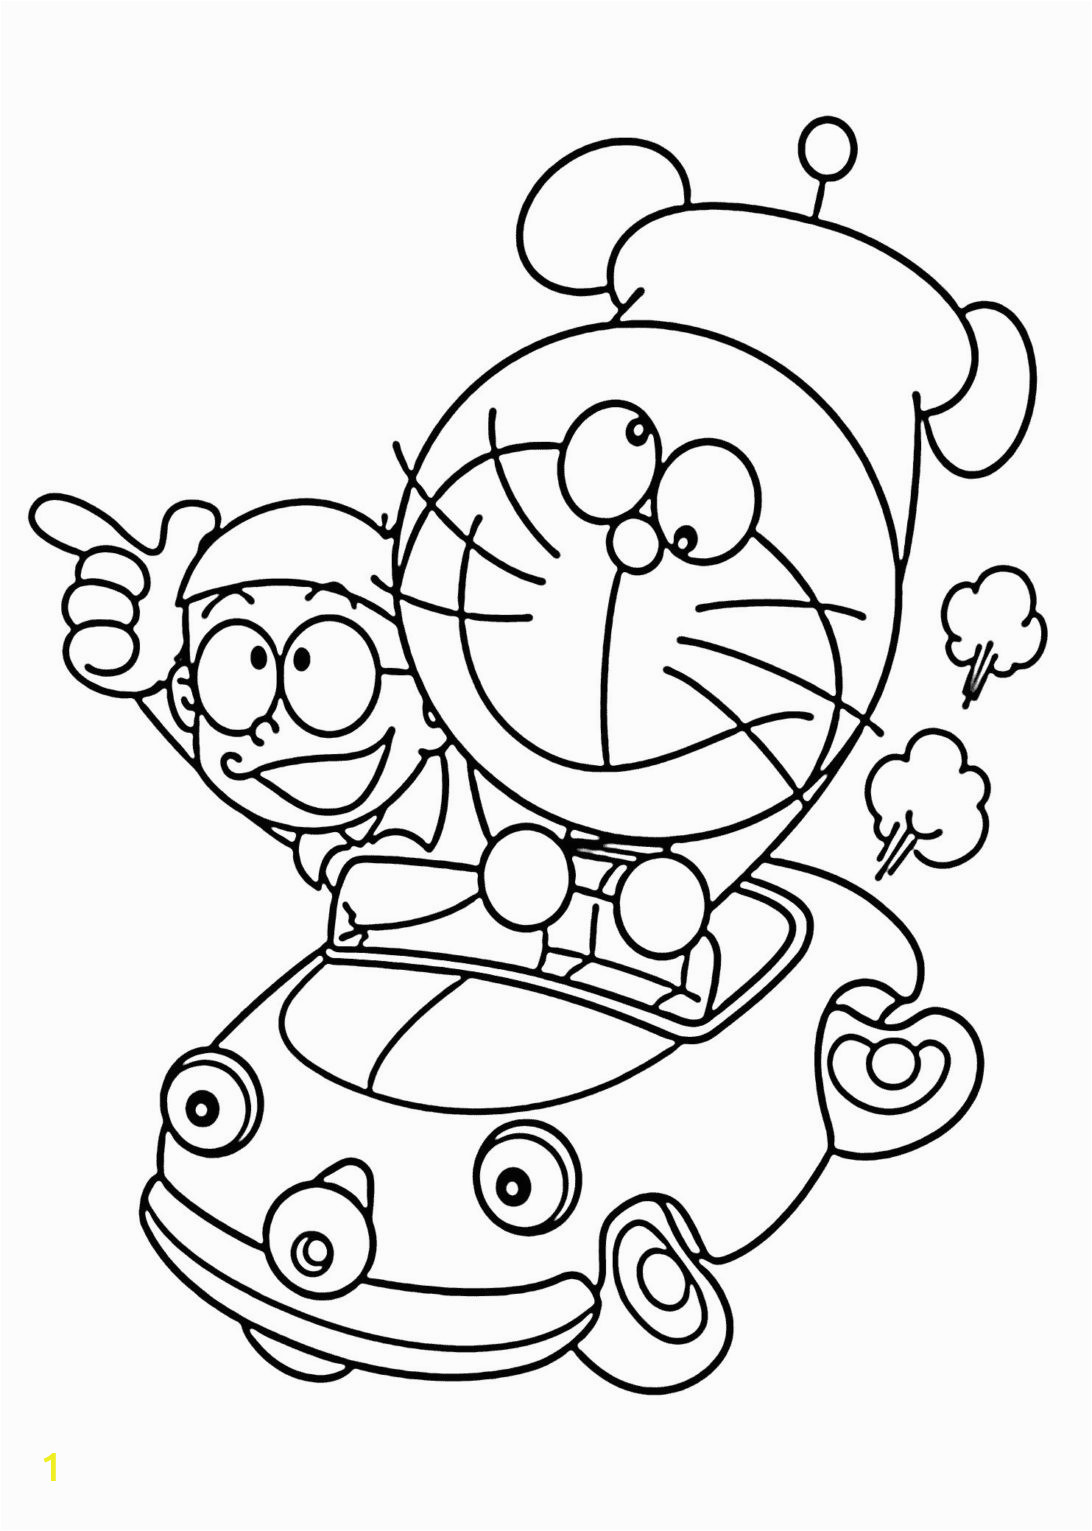 Thanksgiving Coloring Pages Free top 51 Skookum Turkey Coloring Pages Disney Mandala Free